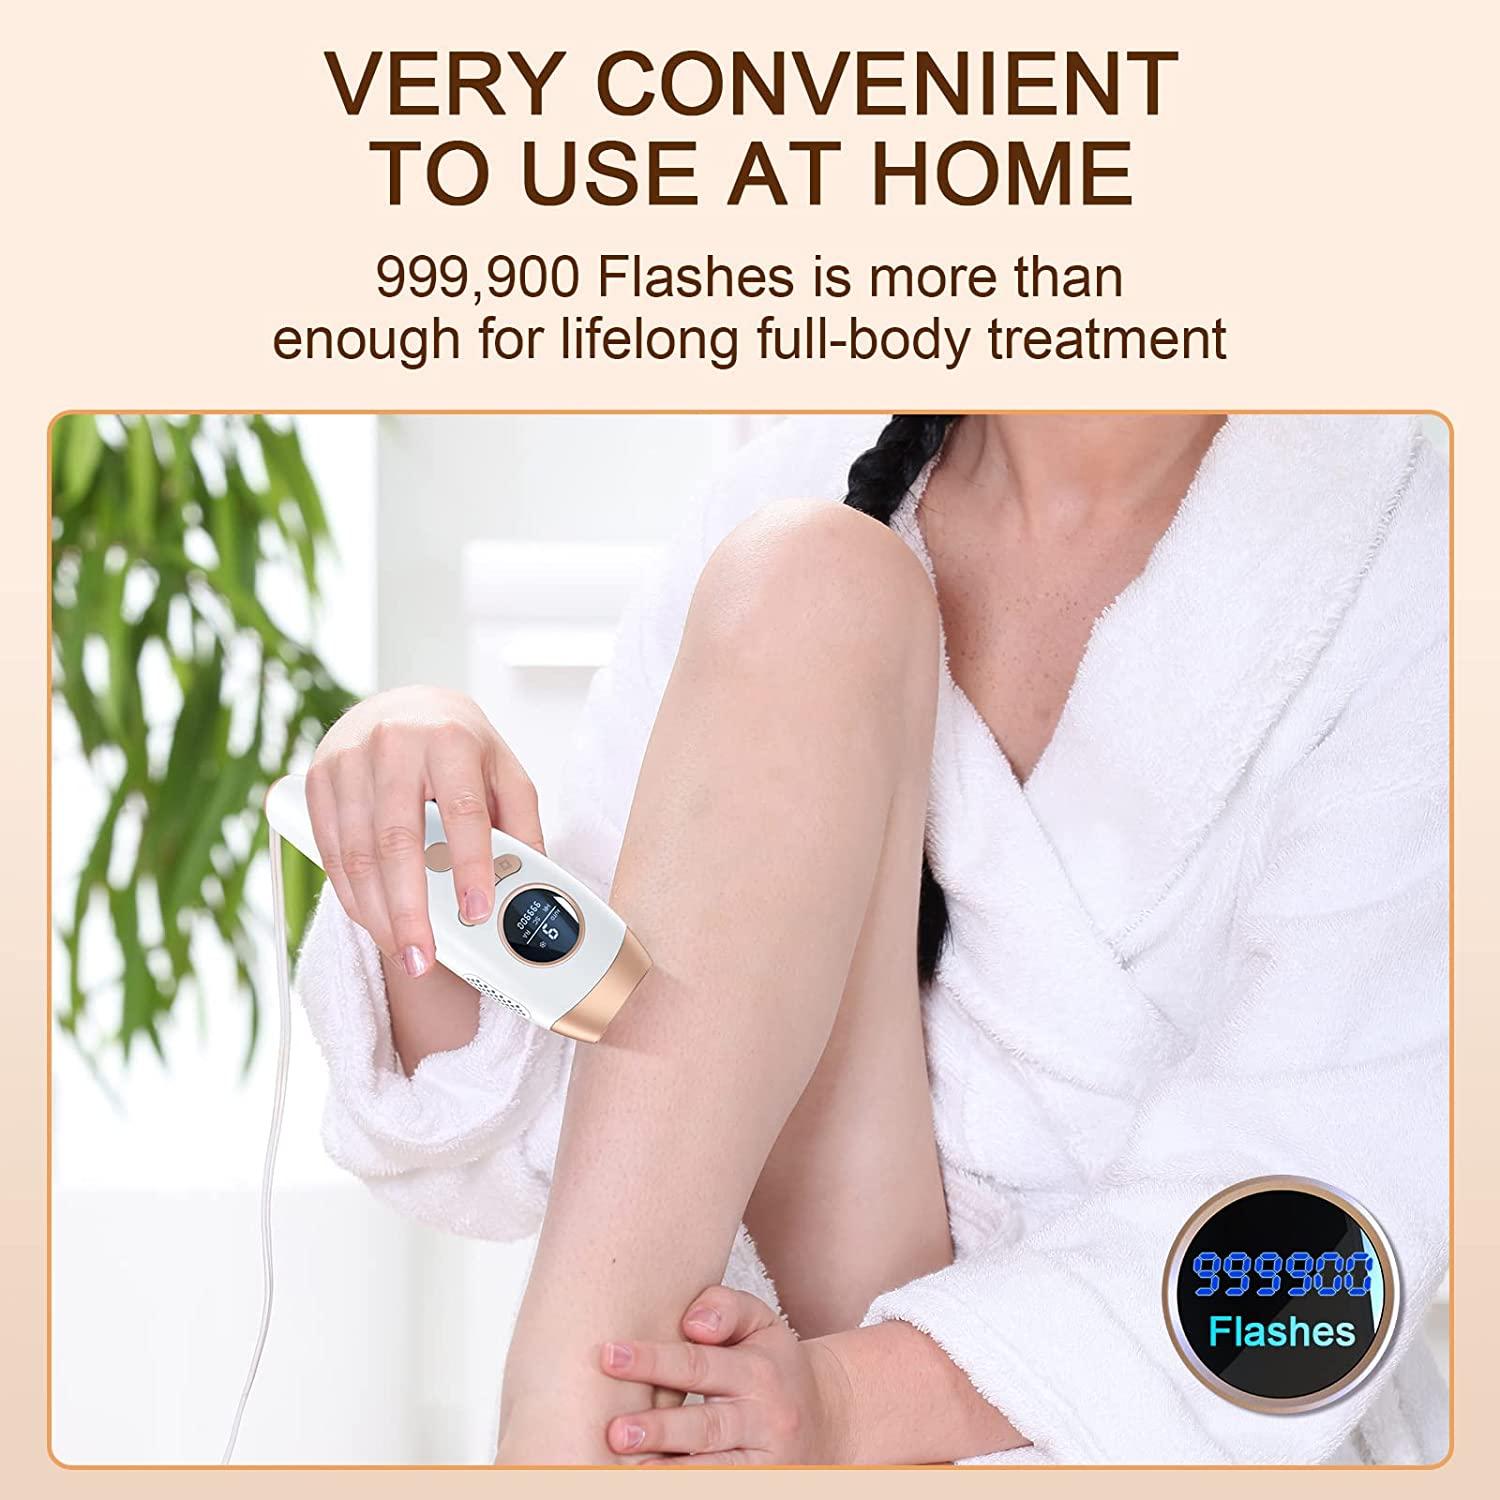  Laser IPL Hair Removal, IPL Hair Removal for Women and